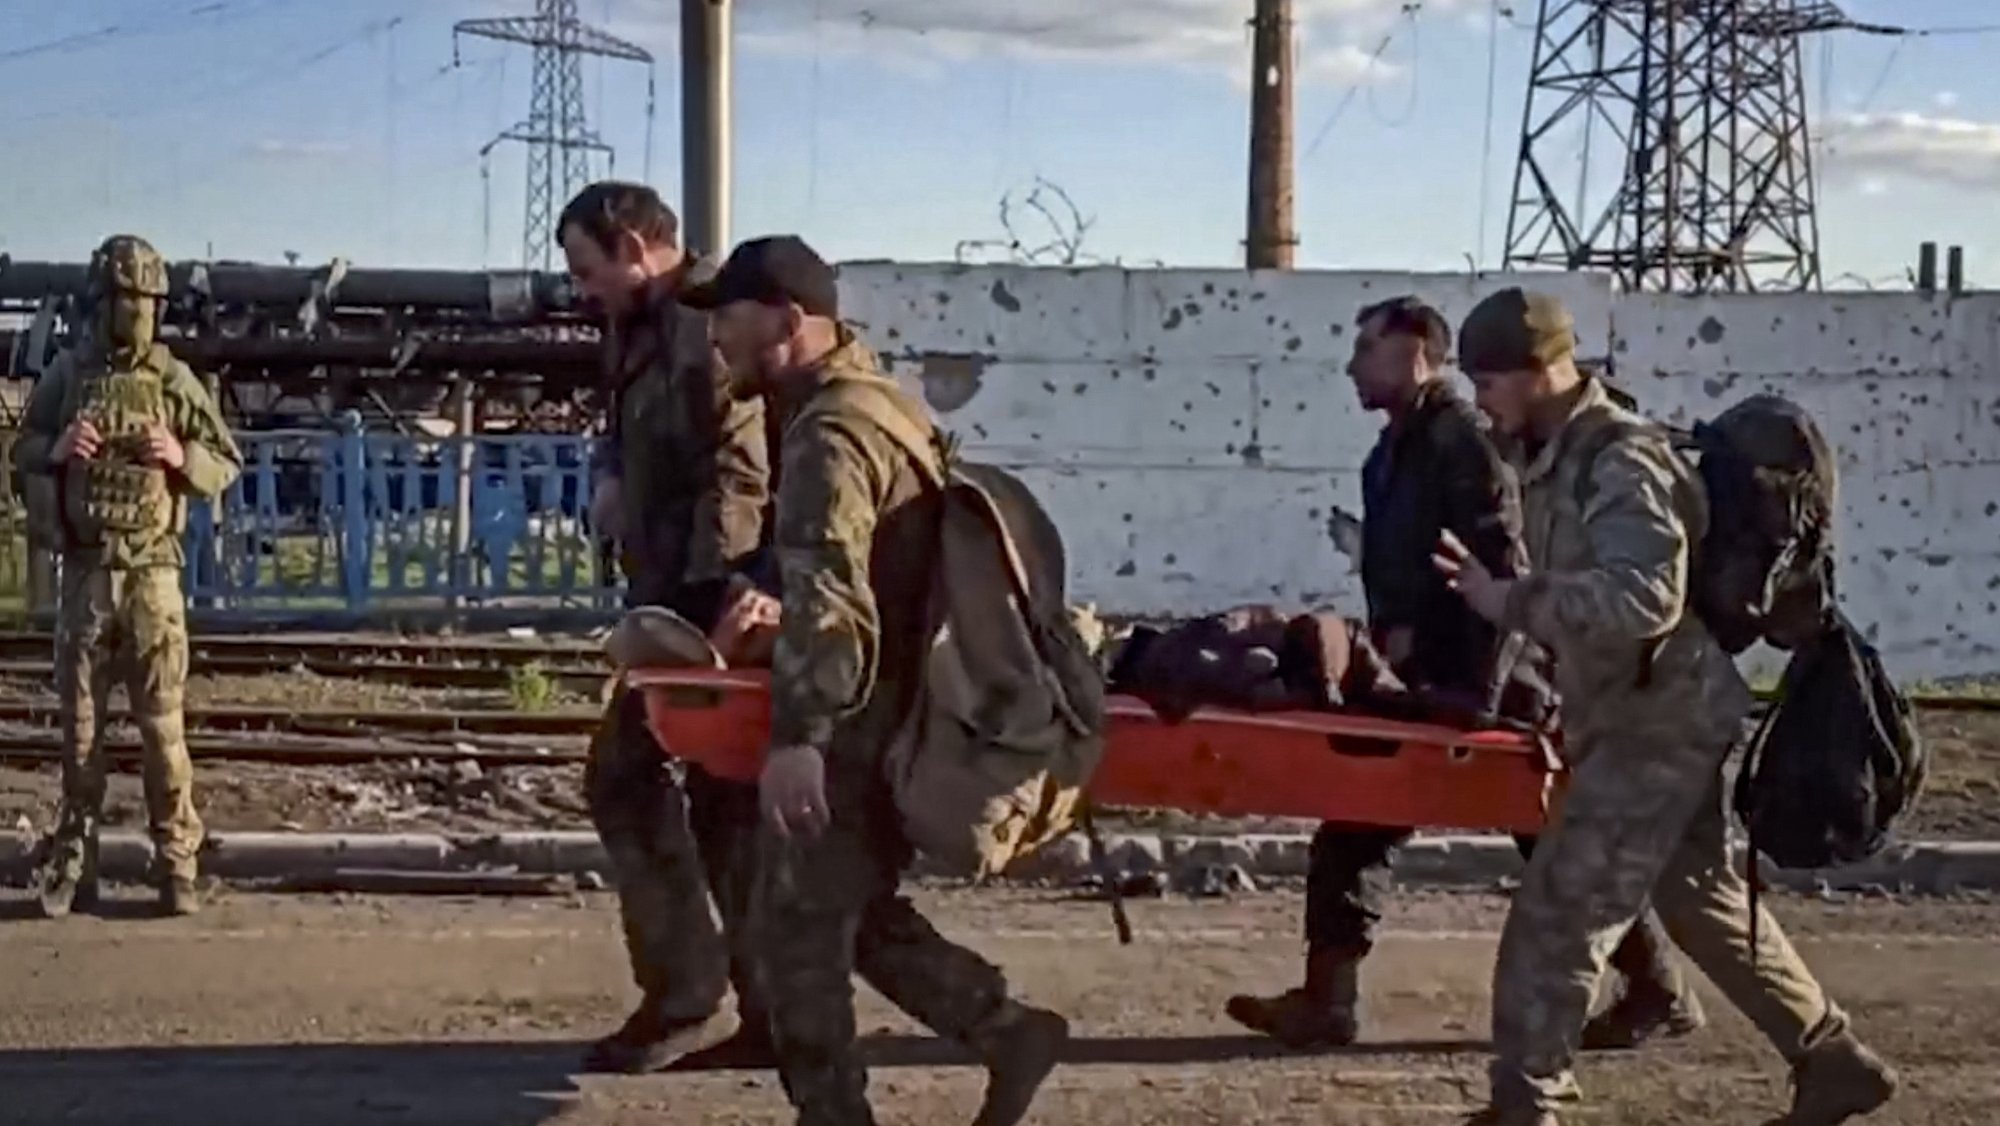 epa09952378 A handout still image taken from a handout video made available by the Russian Defence Ministry&#039;s press service shows Ukrainian servicemen carry a wounded comrade as they are being evacuated from the besieged Azovstal steel plant in Mariupol, Ukraine, 17 May 2022. A total of 265 Ukrainian militants, including 51 seriously wounded, have laid down arms and surrendered to Russian forces, the Russian Ministry of Defence said on 17 May 2022. Those in need of medical assistance were sent for treatment to a hospital in Novoazovsk, the ministry states further. Russian President Putin on 21 April 2022 ordered his Defence Minister to not storm but to blockade the plant where a number of Ukrainian fighters were holding out. On 24 February, Russian troops invaded Ukrainian territory starting a conflict that has provoked destruction and a humanitarian crisis. According to the UNHCR, more than six million refugees have fled Ukraine, and a further 7.7 million people have been displaced internally within Ukraine since.  EPA/RUSSIAN DEFENCE MINISTRY PRESS SERVICE HANDOUT  BEST QUALITY AVAILABLE HANDOUT EDITORIAL USE ONLY/NO SALES